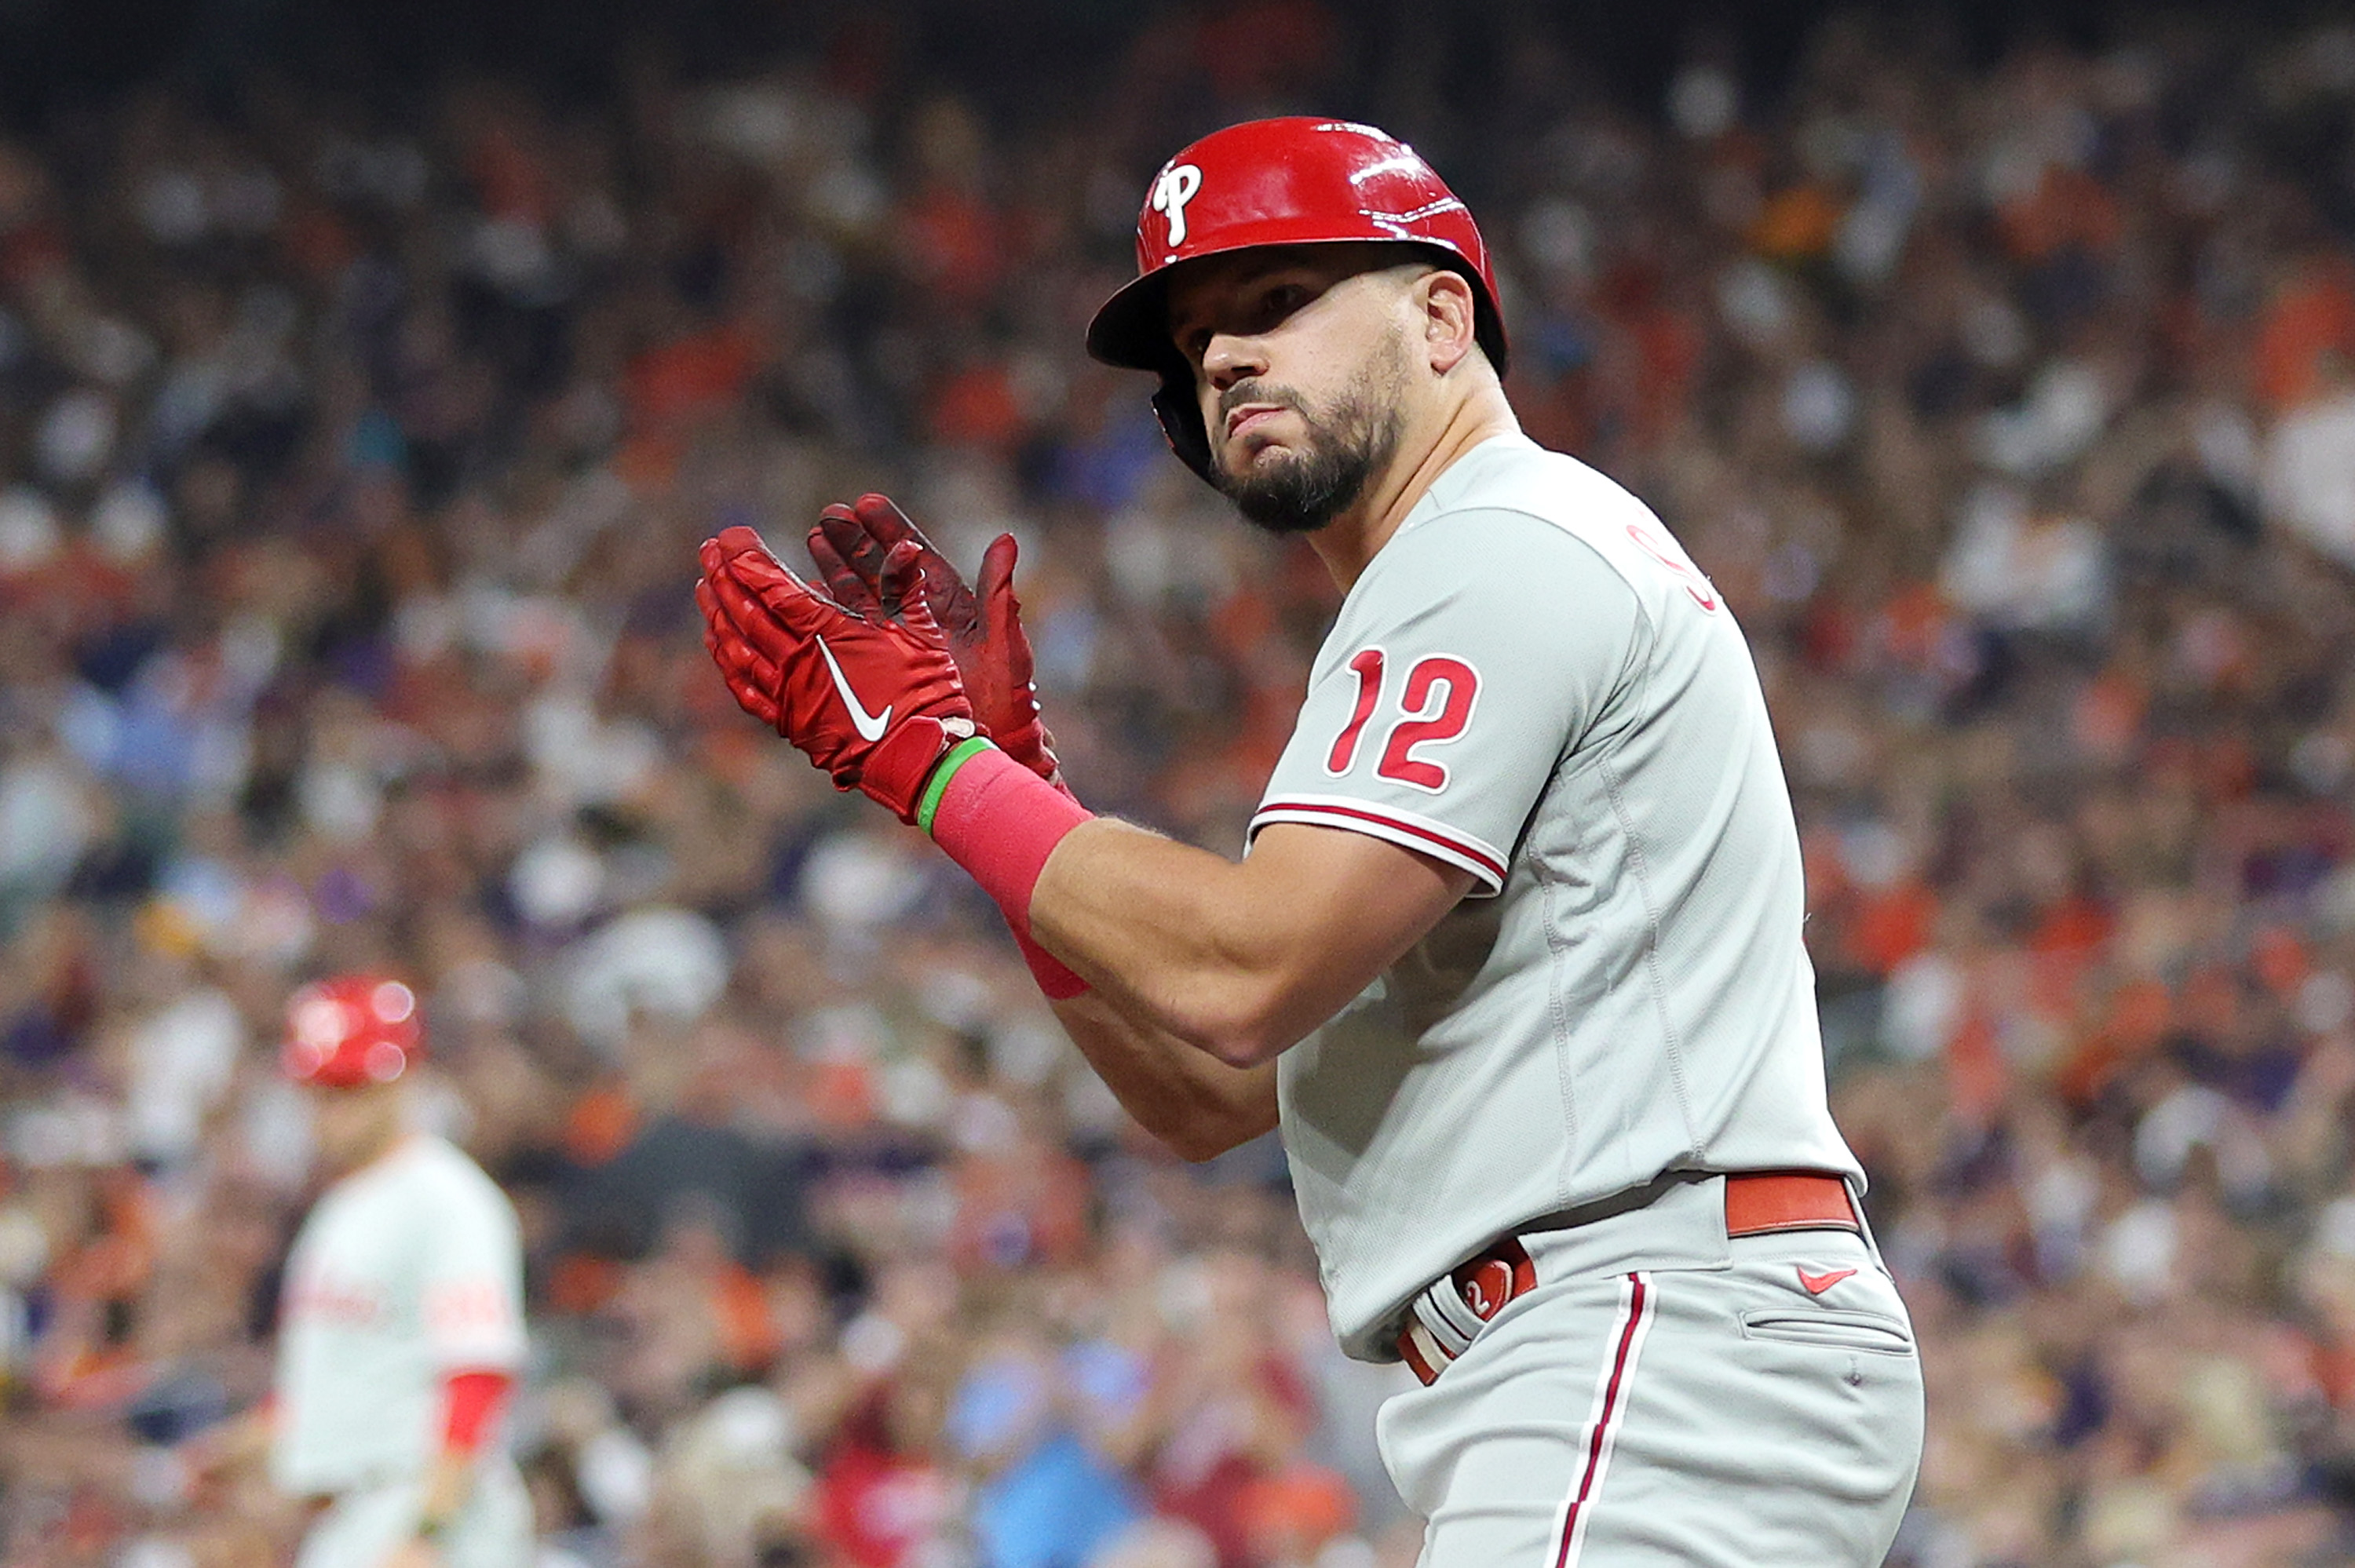 2022 MLB All-Star Game MVP odds: Who is favored to win? Picks